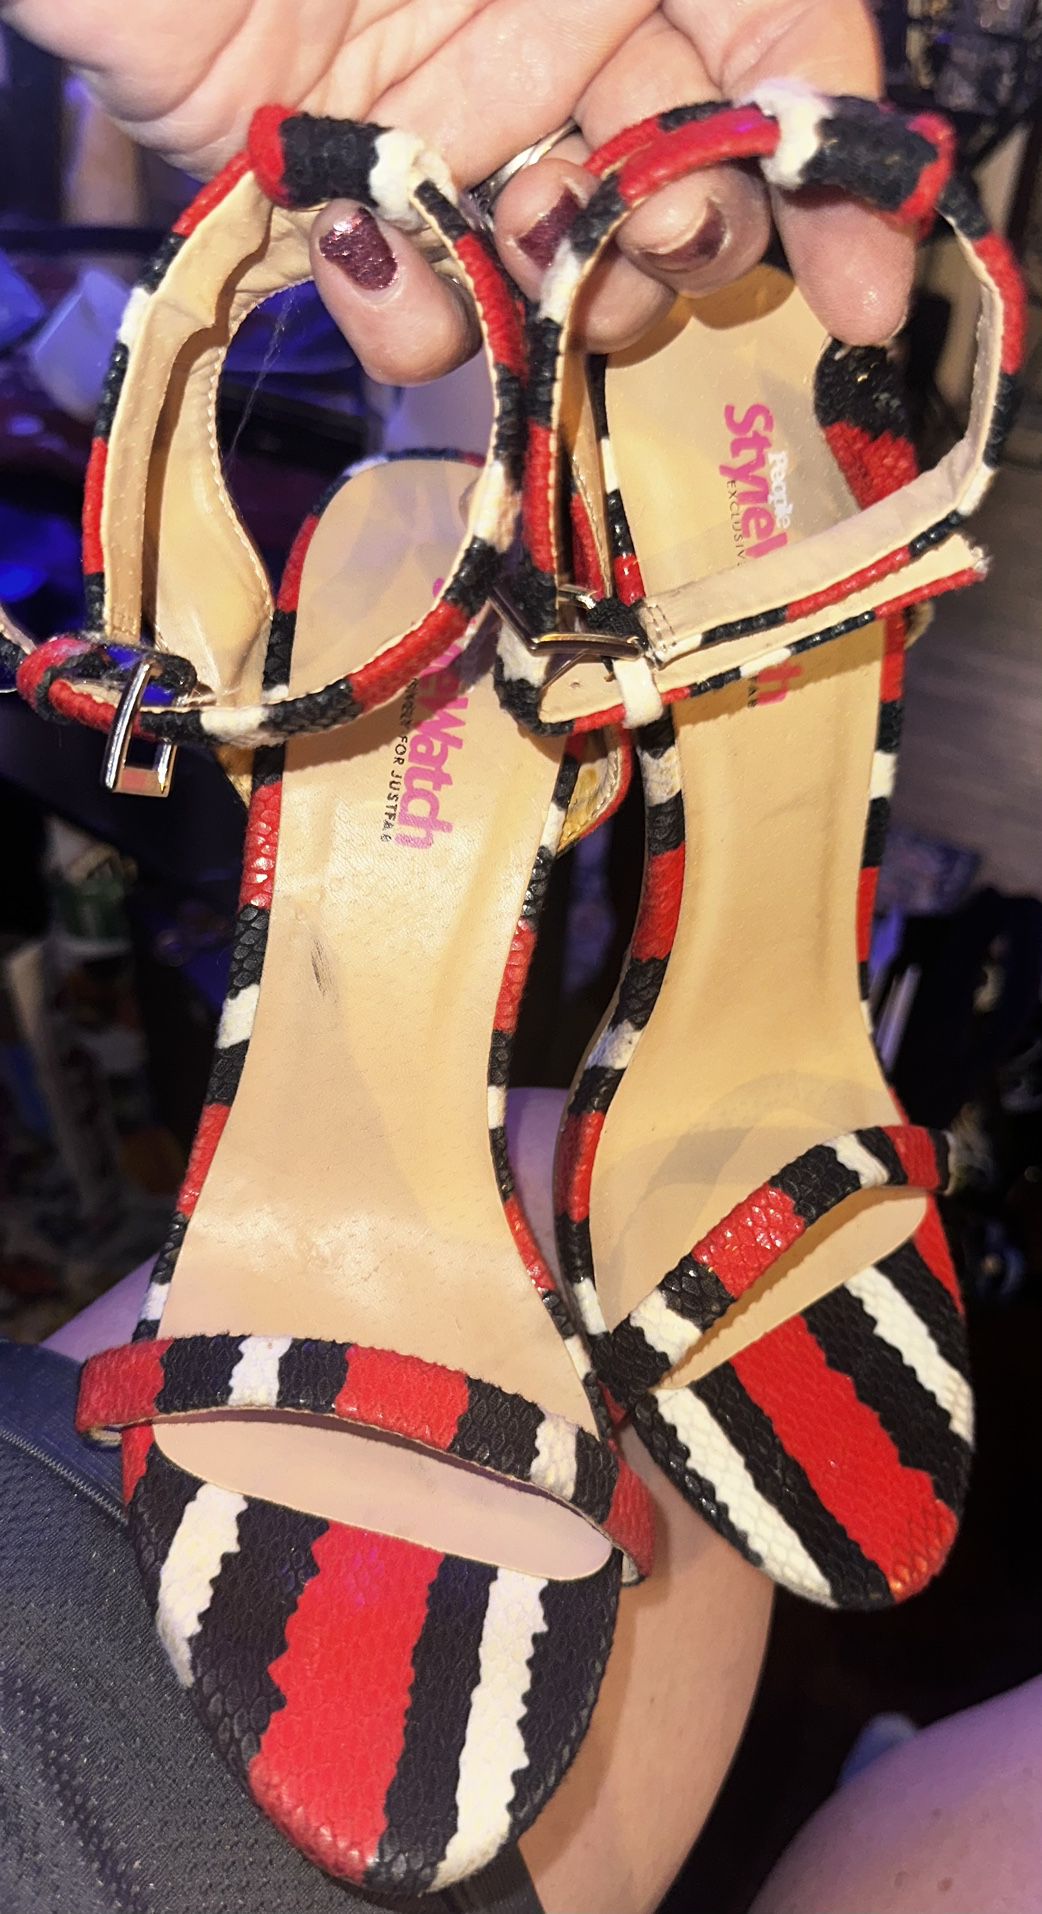 Preowned Woman’s size 9 “people’s style watch” red& black so beautiful heels in great condition located Off lake mead and Simmons area asking $10